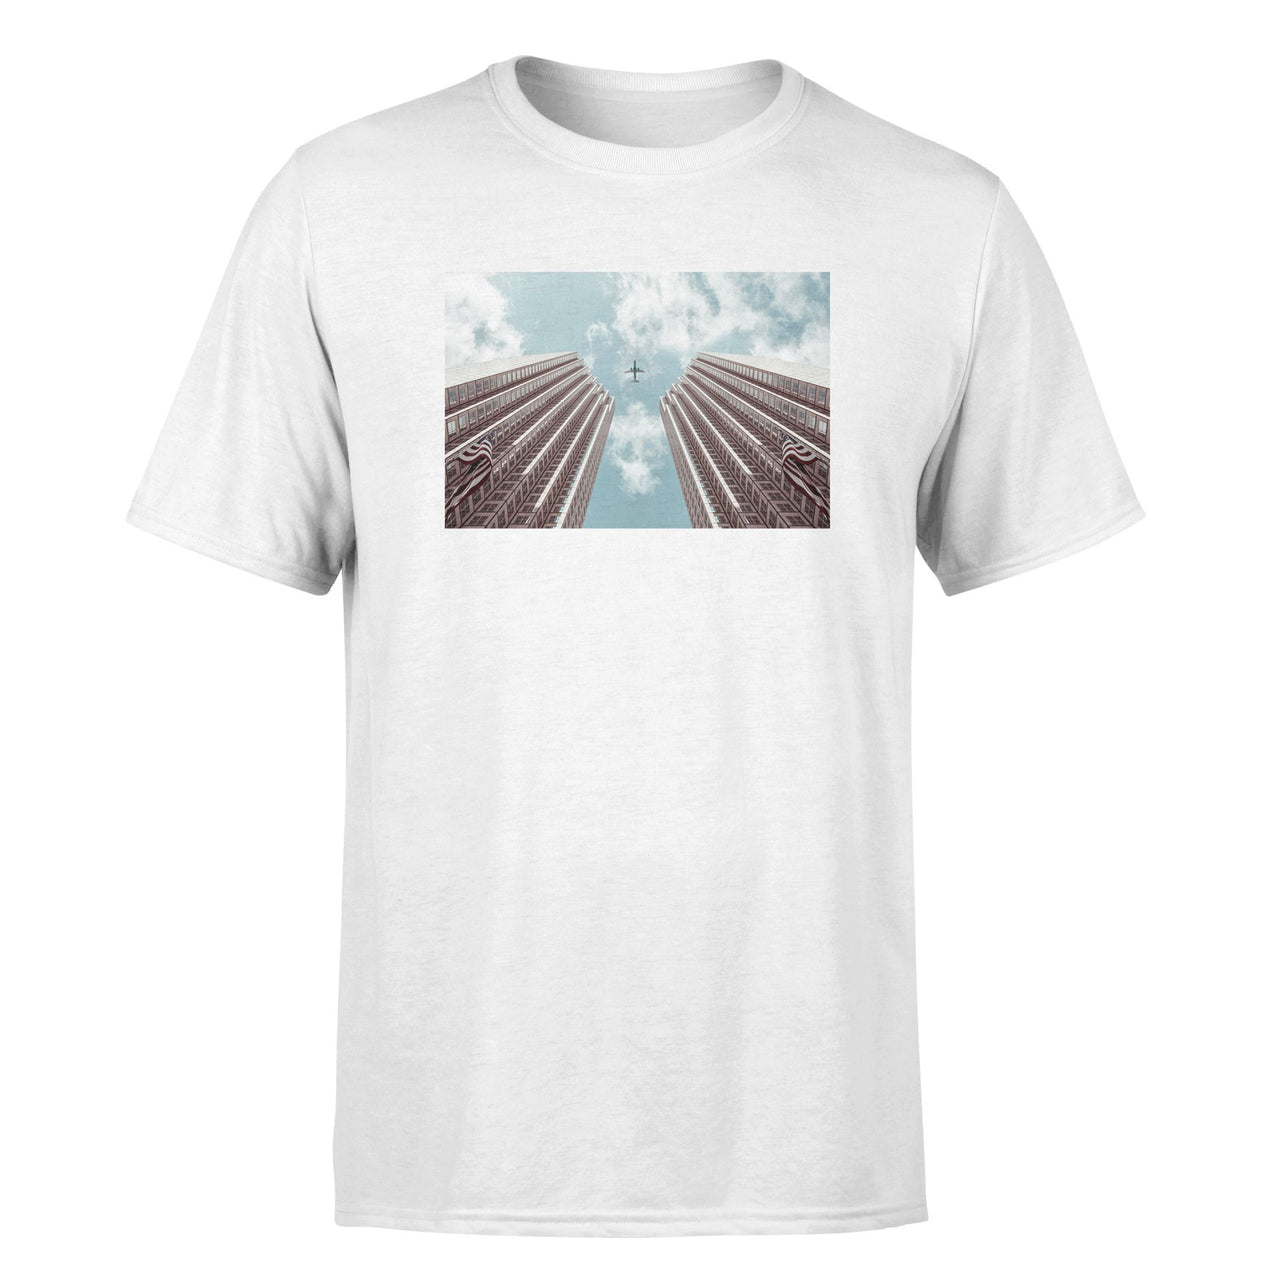 Airplane Flying over Big Buildings Designed T-Shirts